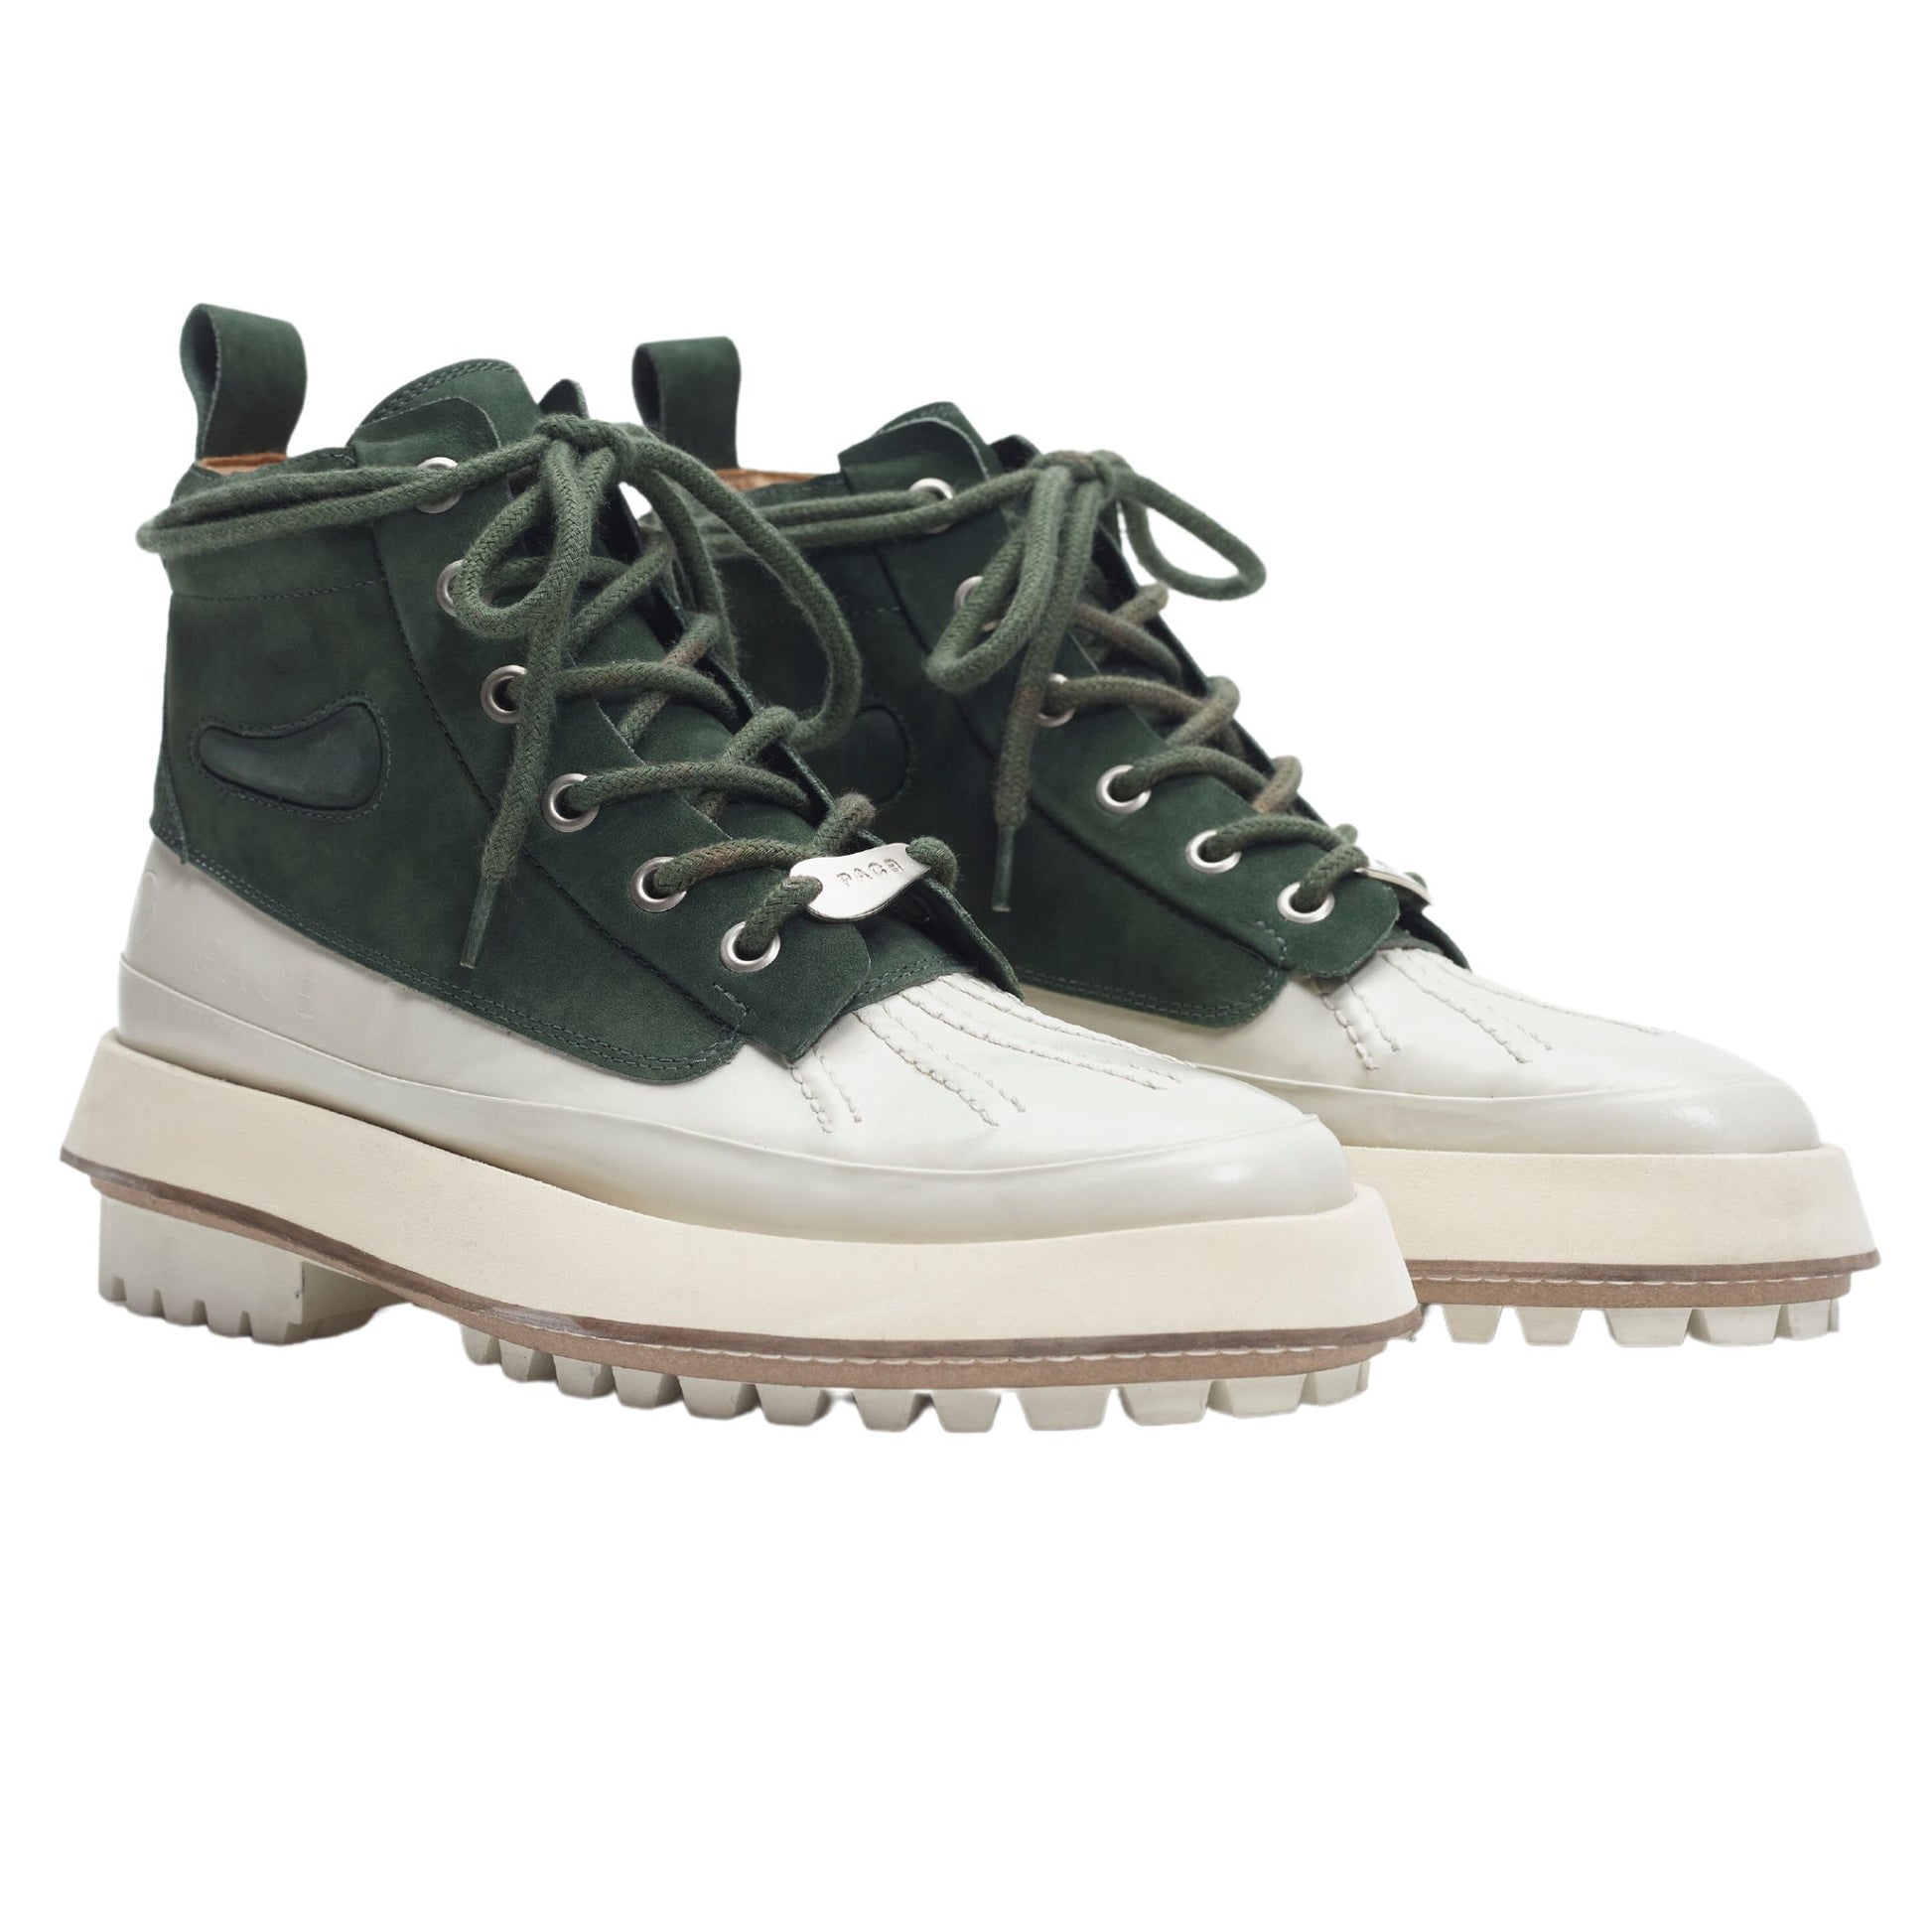 PACE - XP Duckboot "Green/Off White" - THE GAME